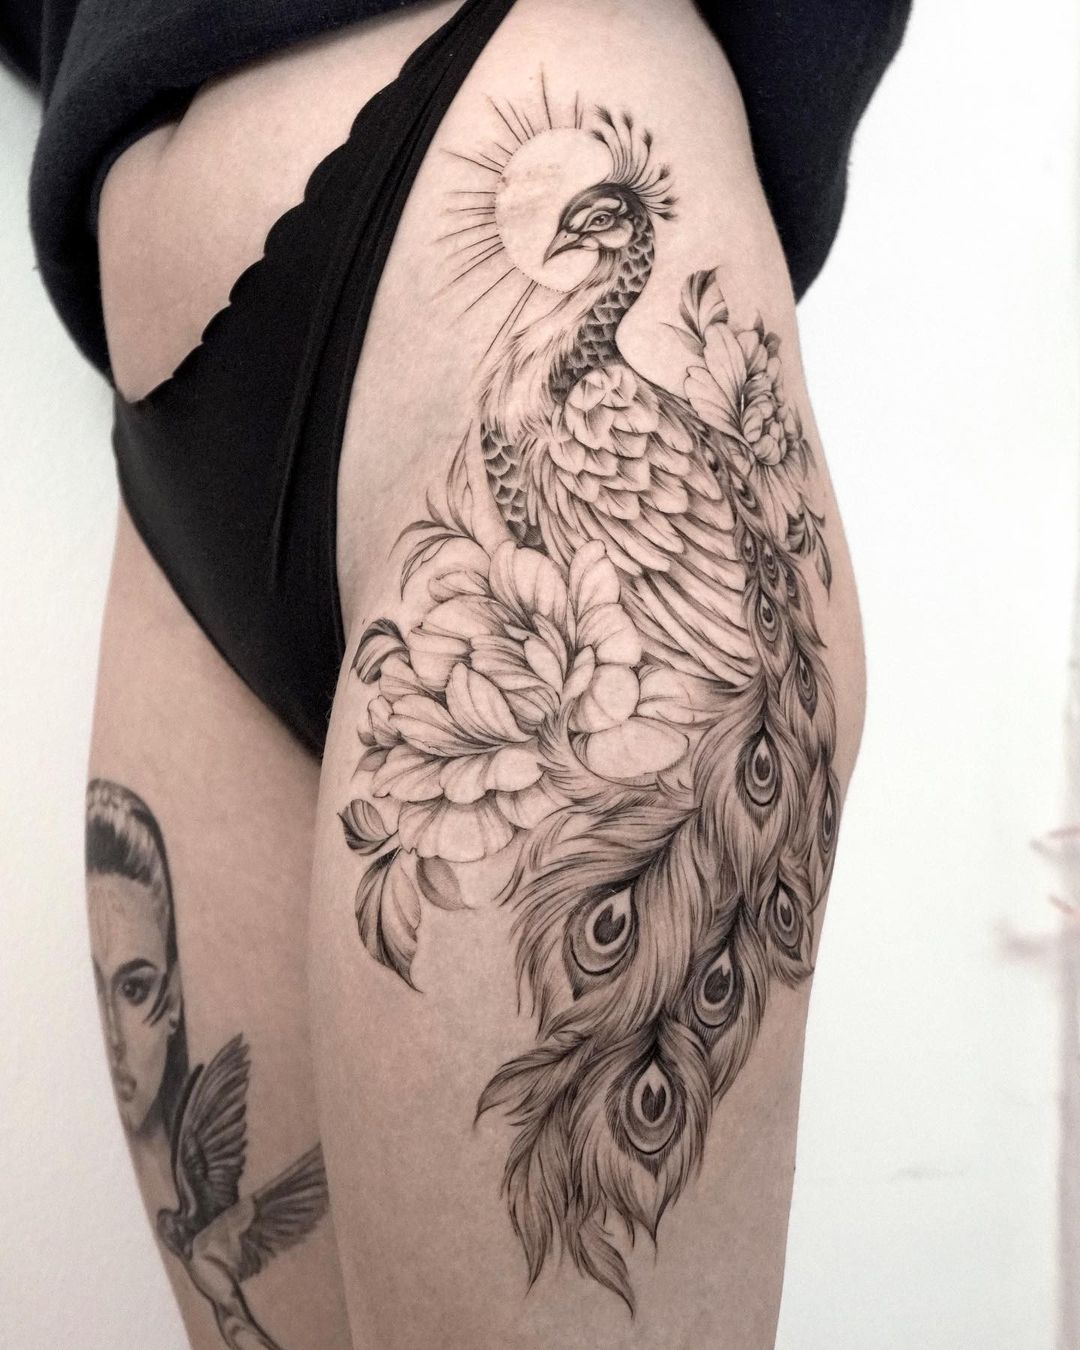 Peacock tattoo on thigh by miriamandrea.ink